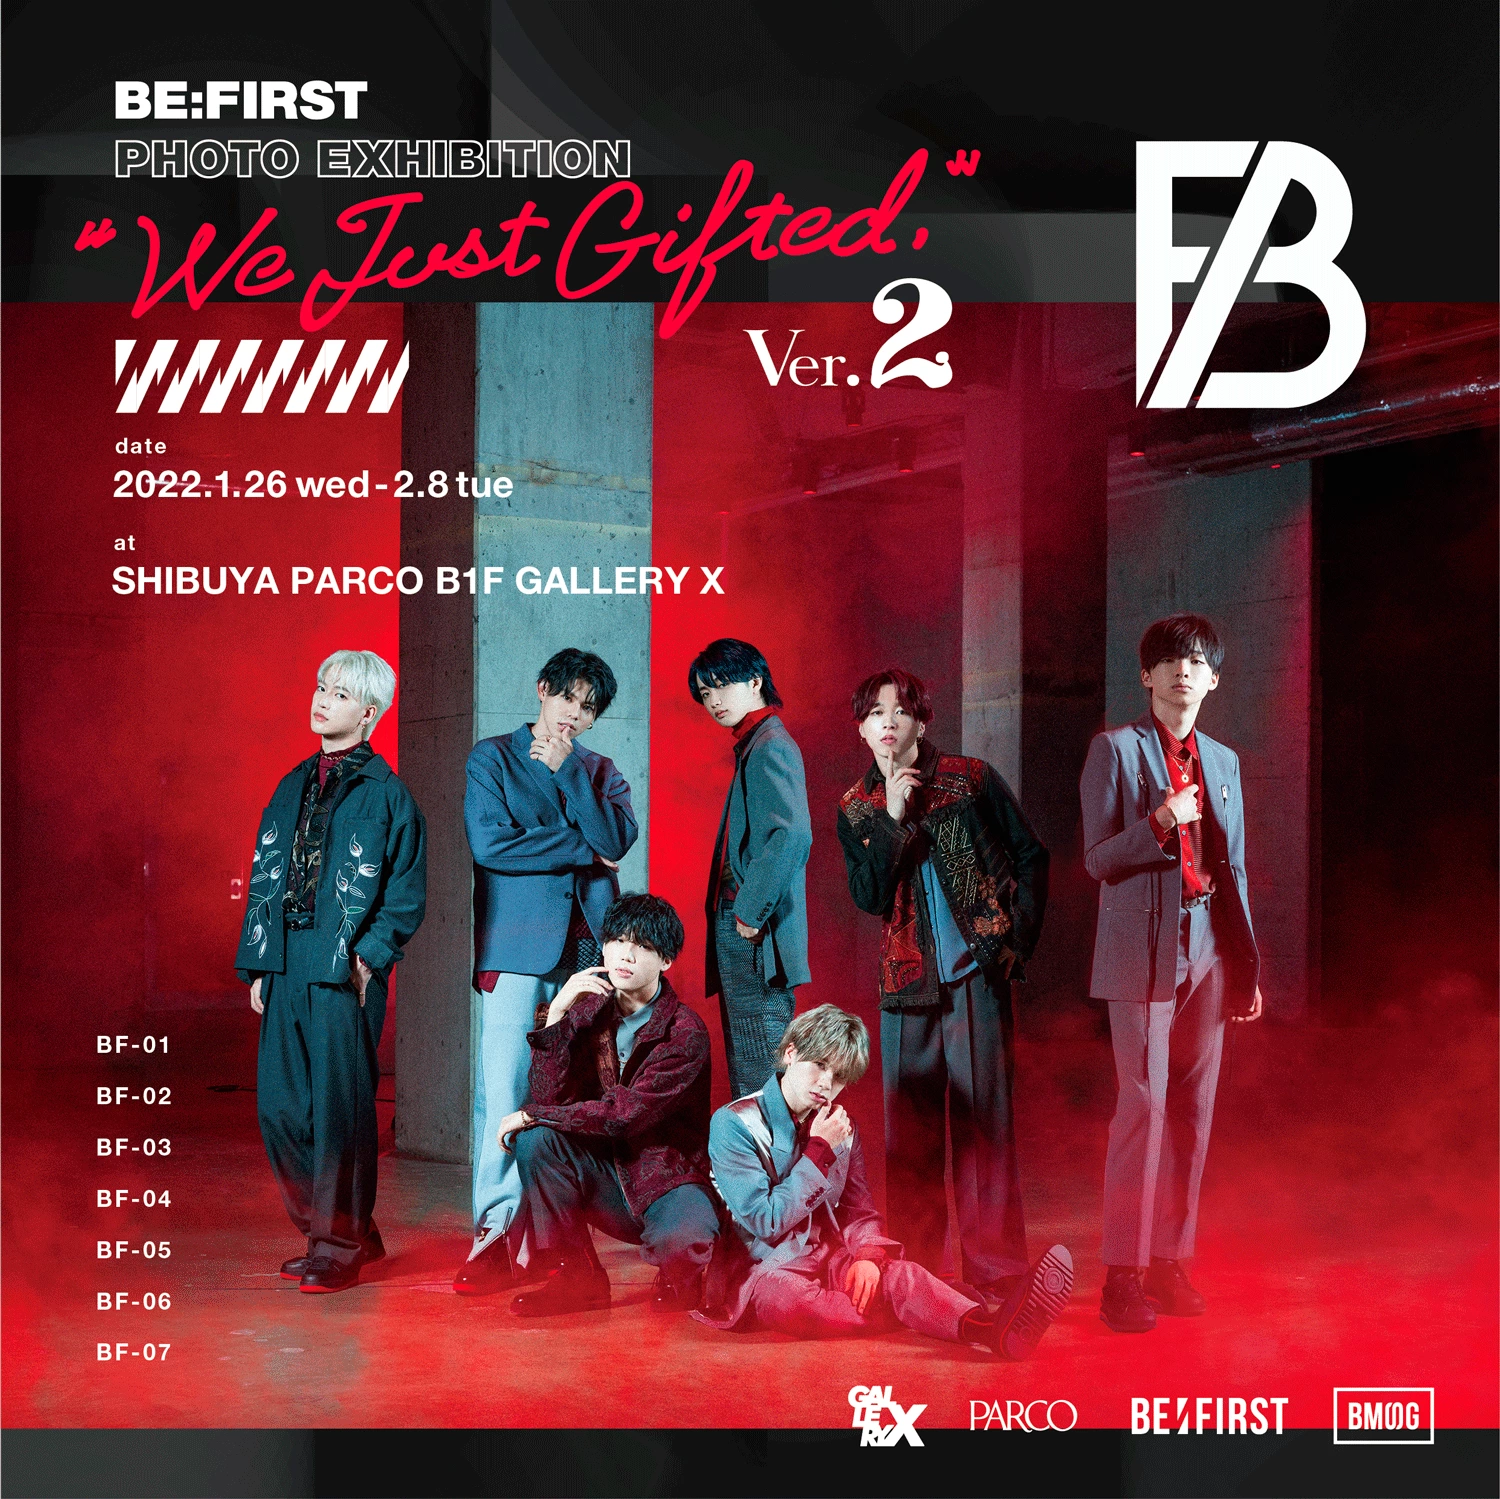 BE:FIRST PHOTO EXHIBITION “We Just Gifted.” Ver.2